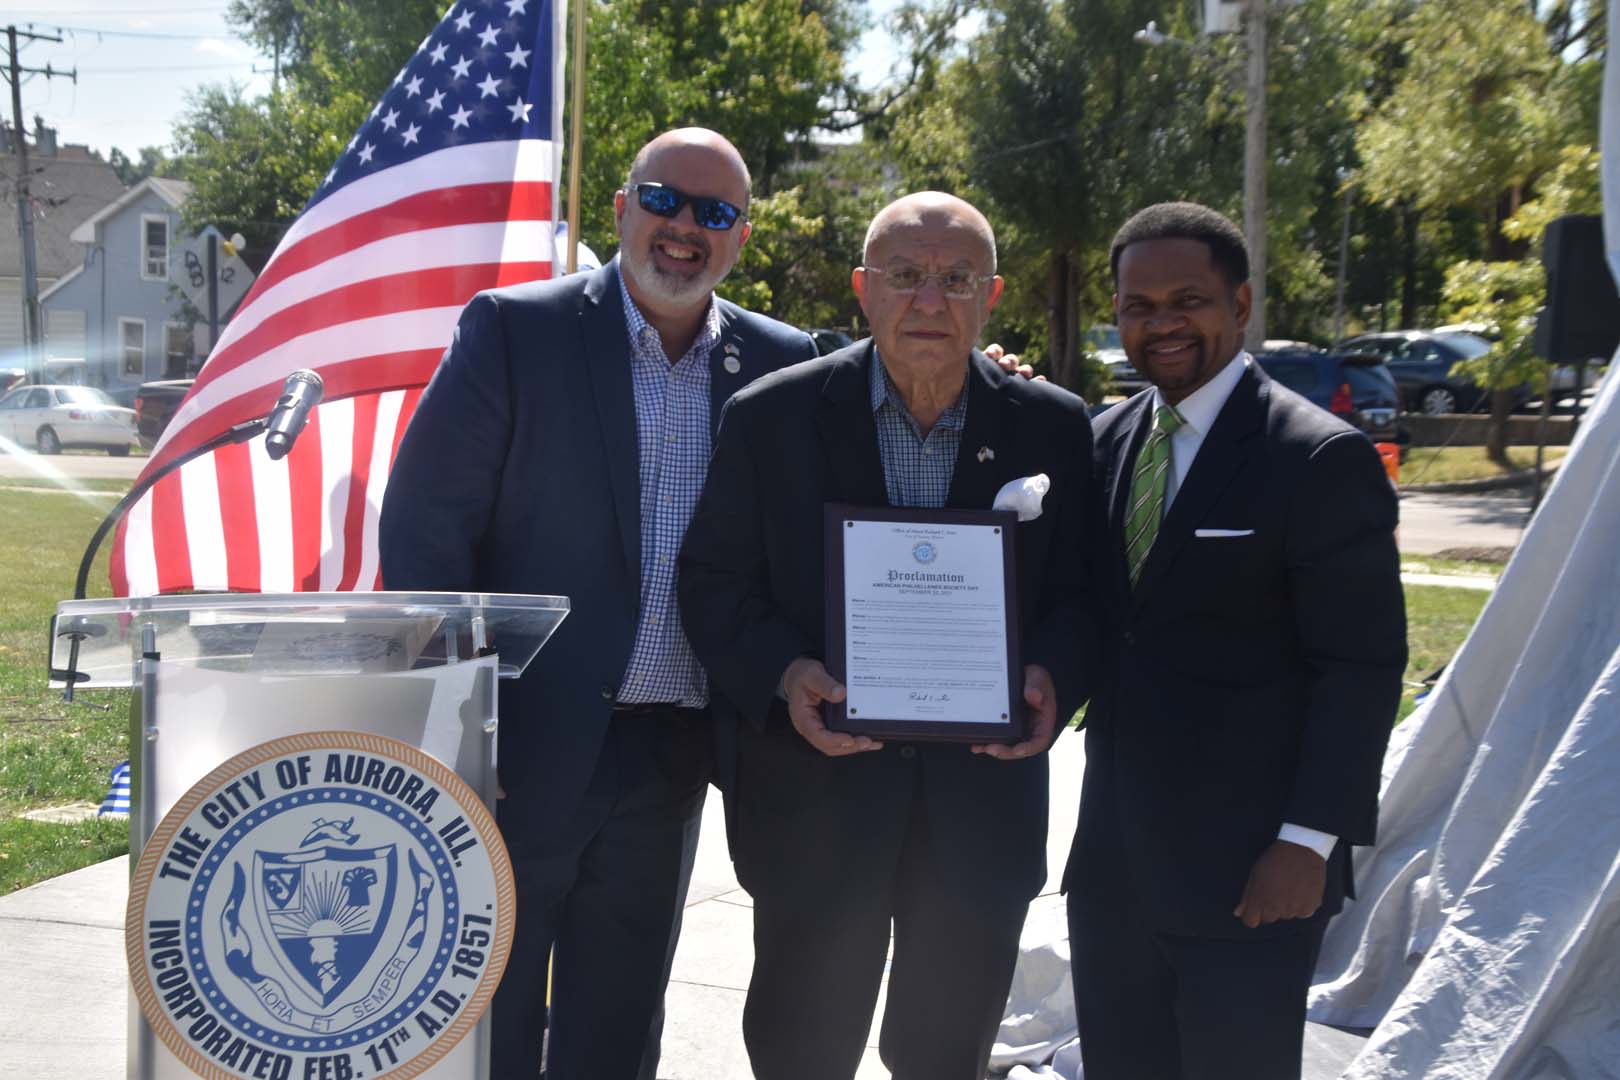 September 25th 2021 monument unveiled in Aurora Illinois - Alex Alexandrou, Panagiotis Nikolopoulos, Mayor Irvin with Proclamation for American Philhellenes Society Day in the City of Aurora, September 25, 2021